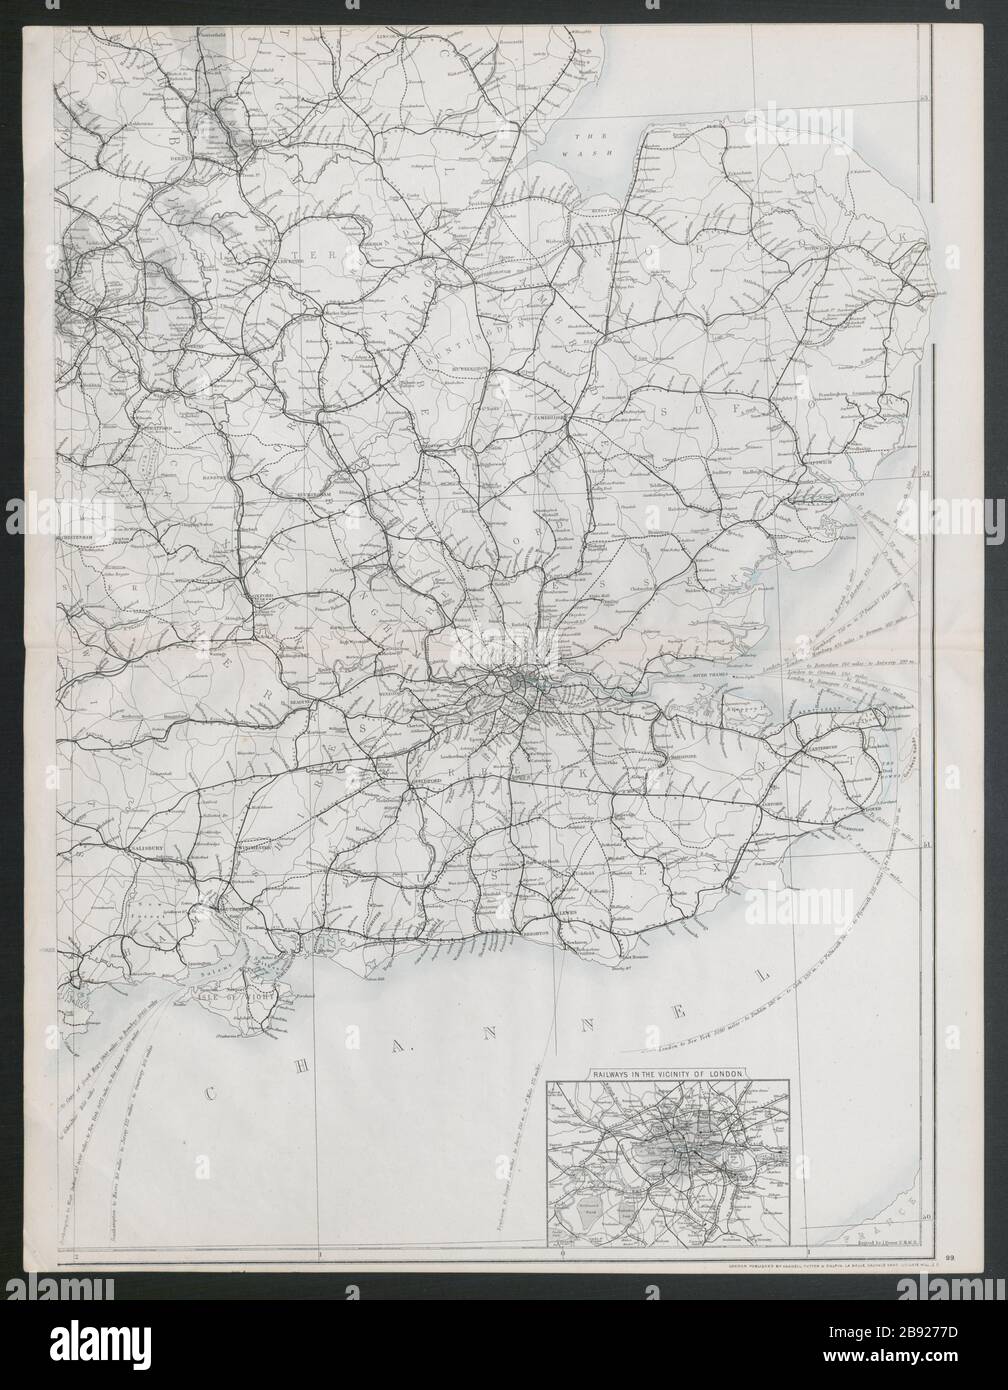 'Great Britain showing all the railways…' South-east England. DOWER 1868 map Stock Photo